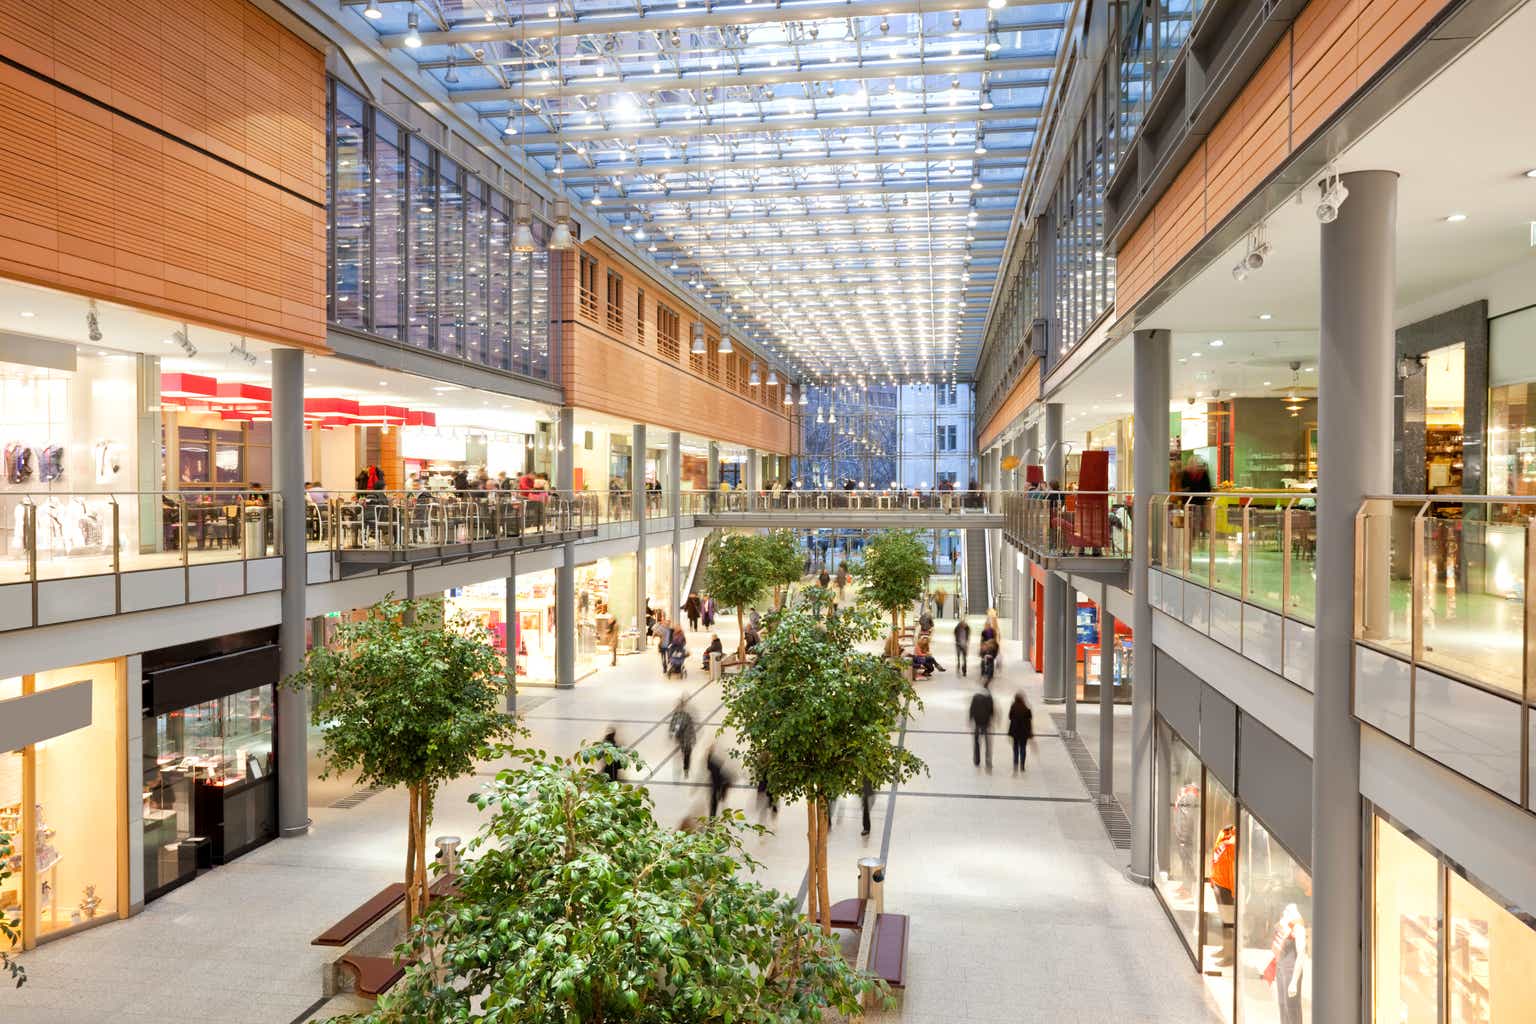 Macerich: Recovery Takes Hold But Balance Sheet Remains A Risk